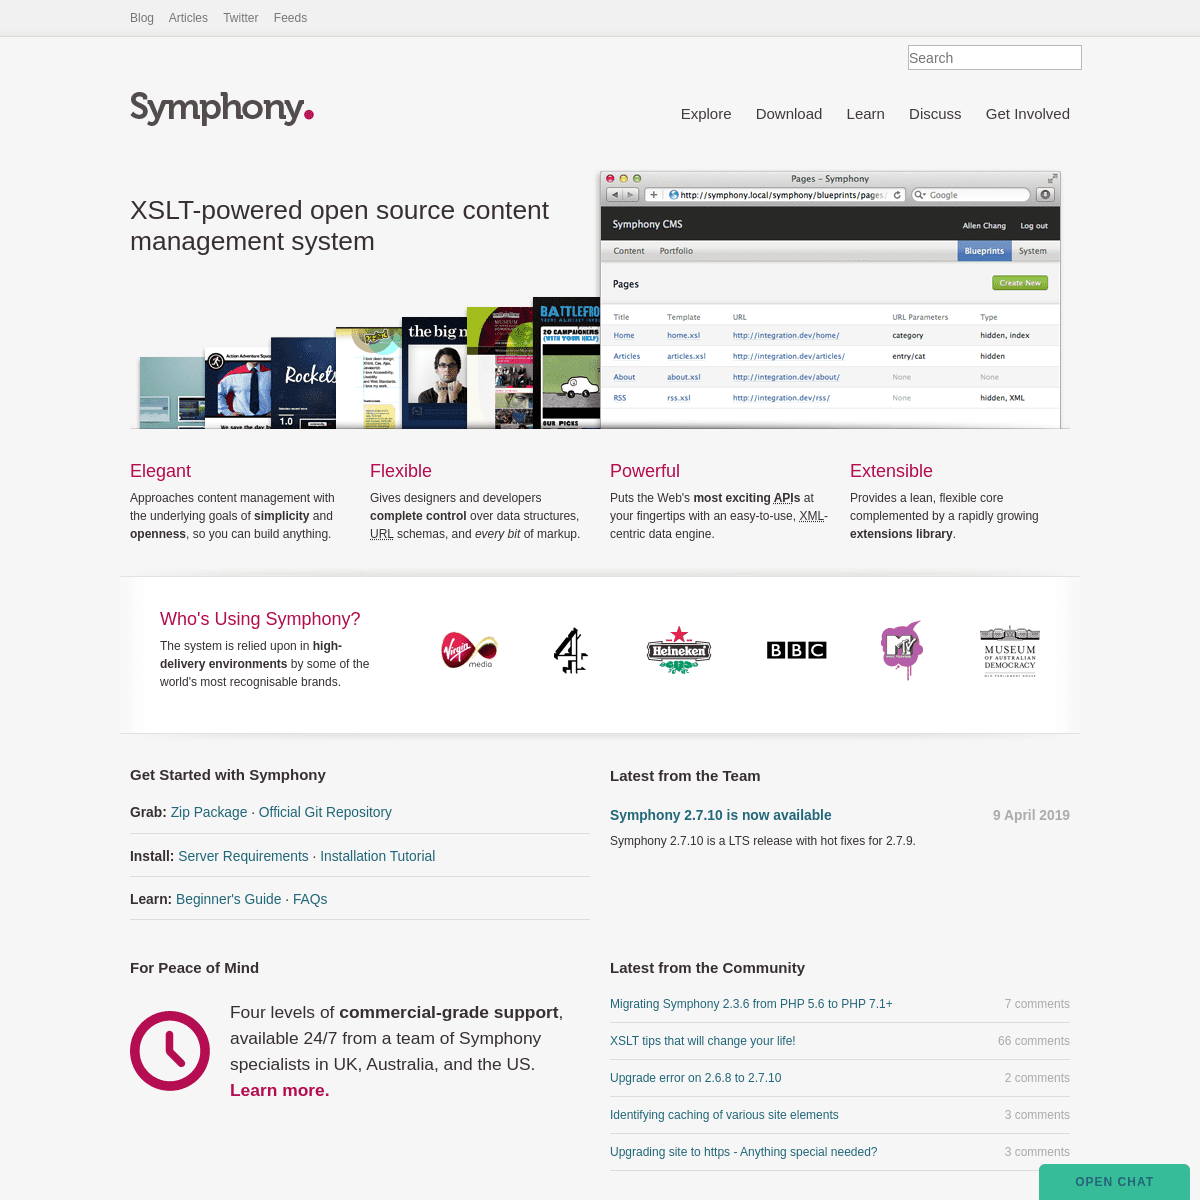 A complete backup of https://getsymphony.com